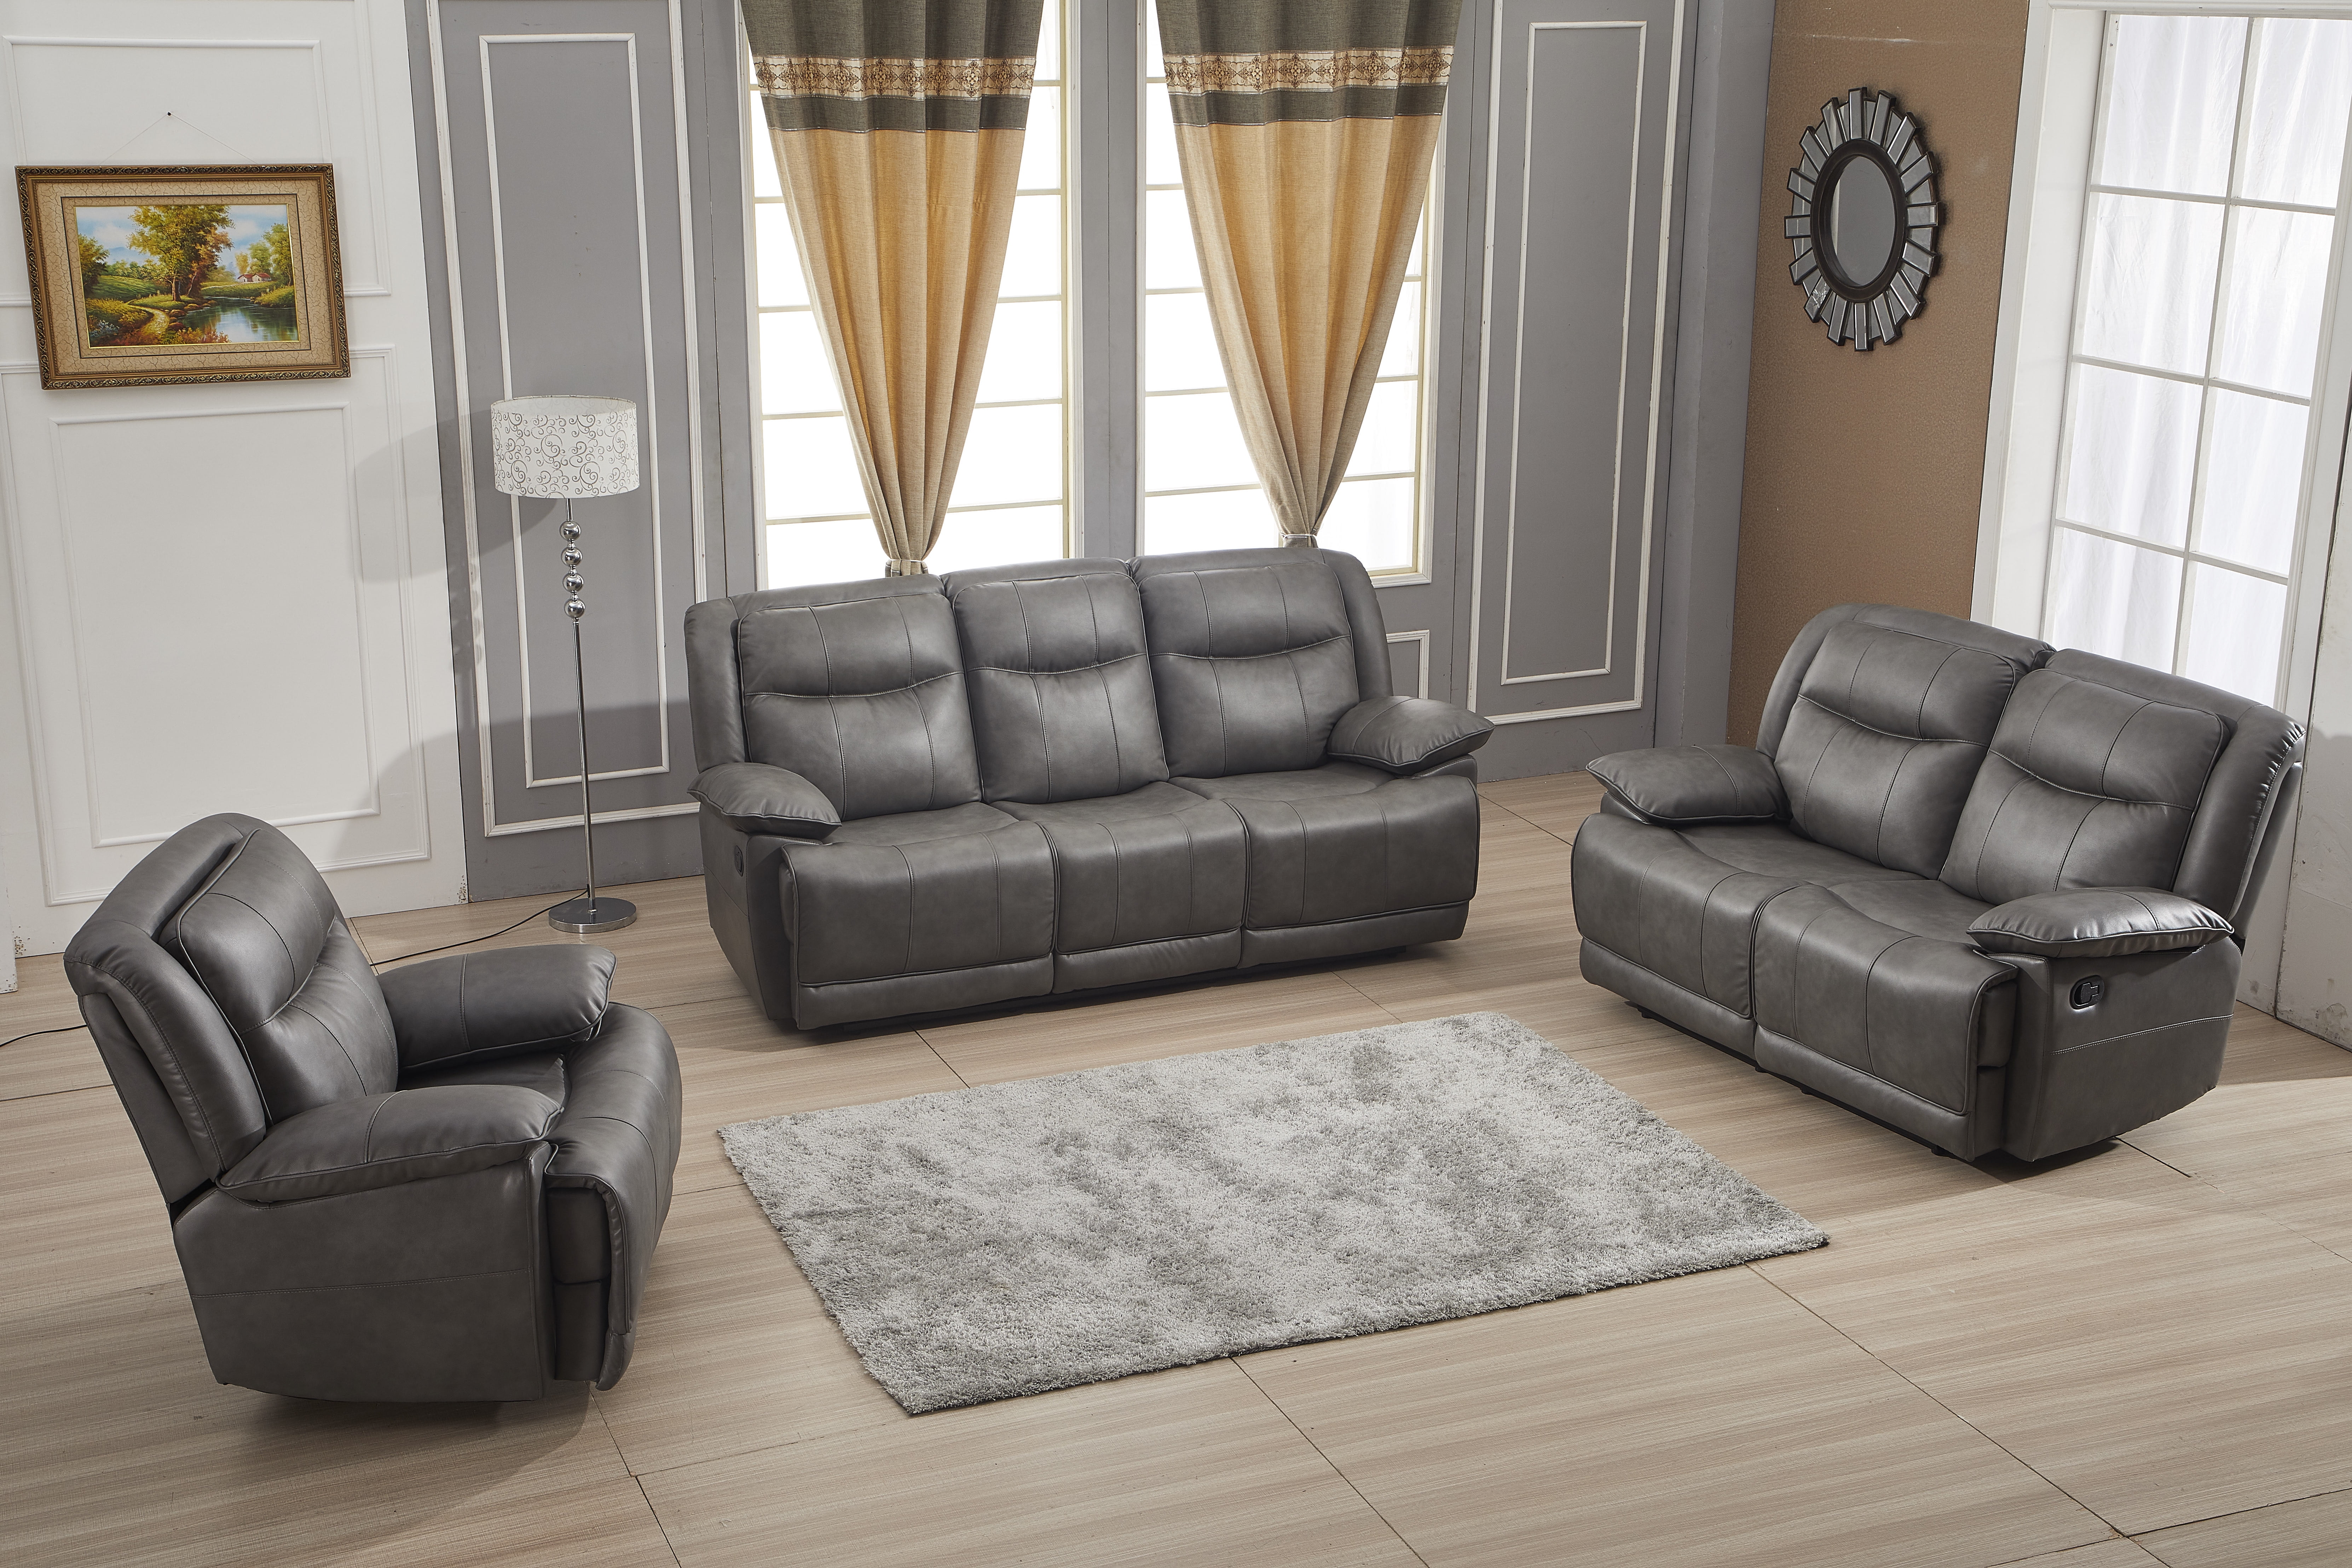 Details about   Living Family Room Furniture Set Gray Microfiber Reclining Sofa Sectional IF2I 